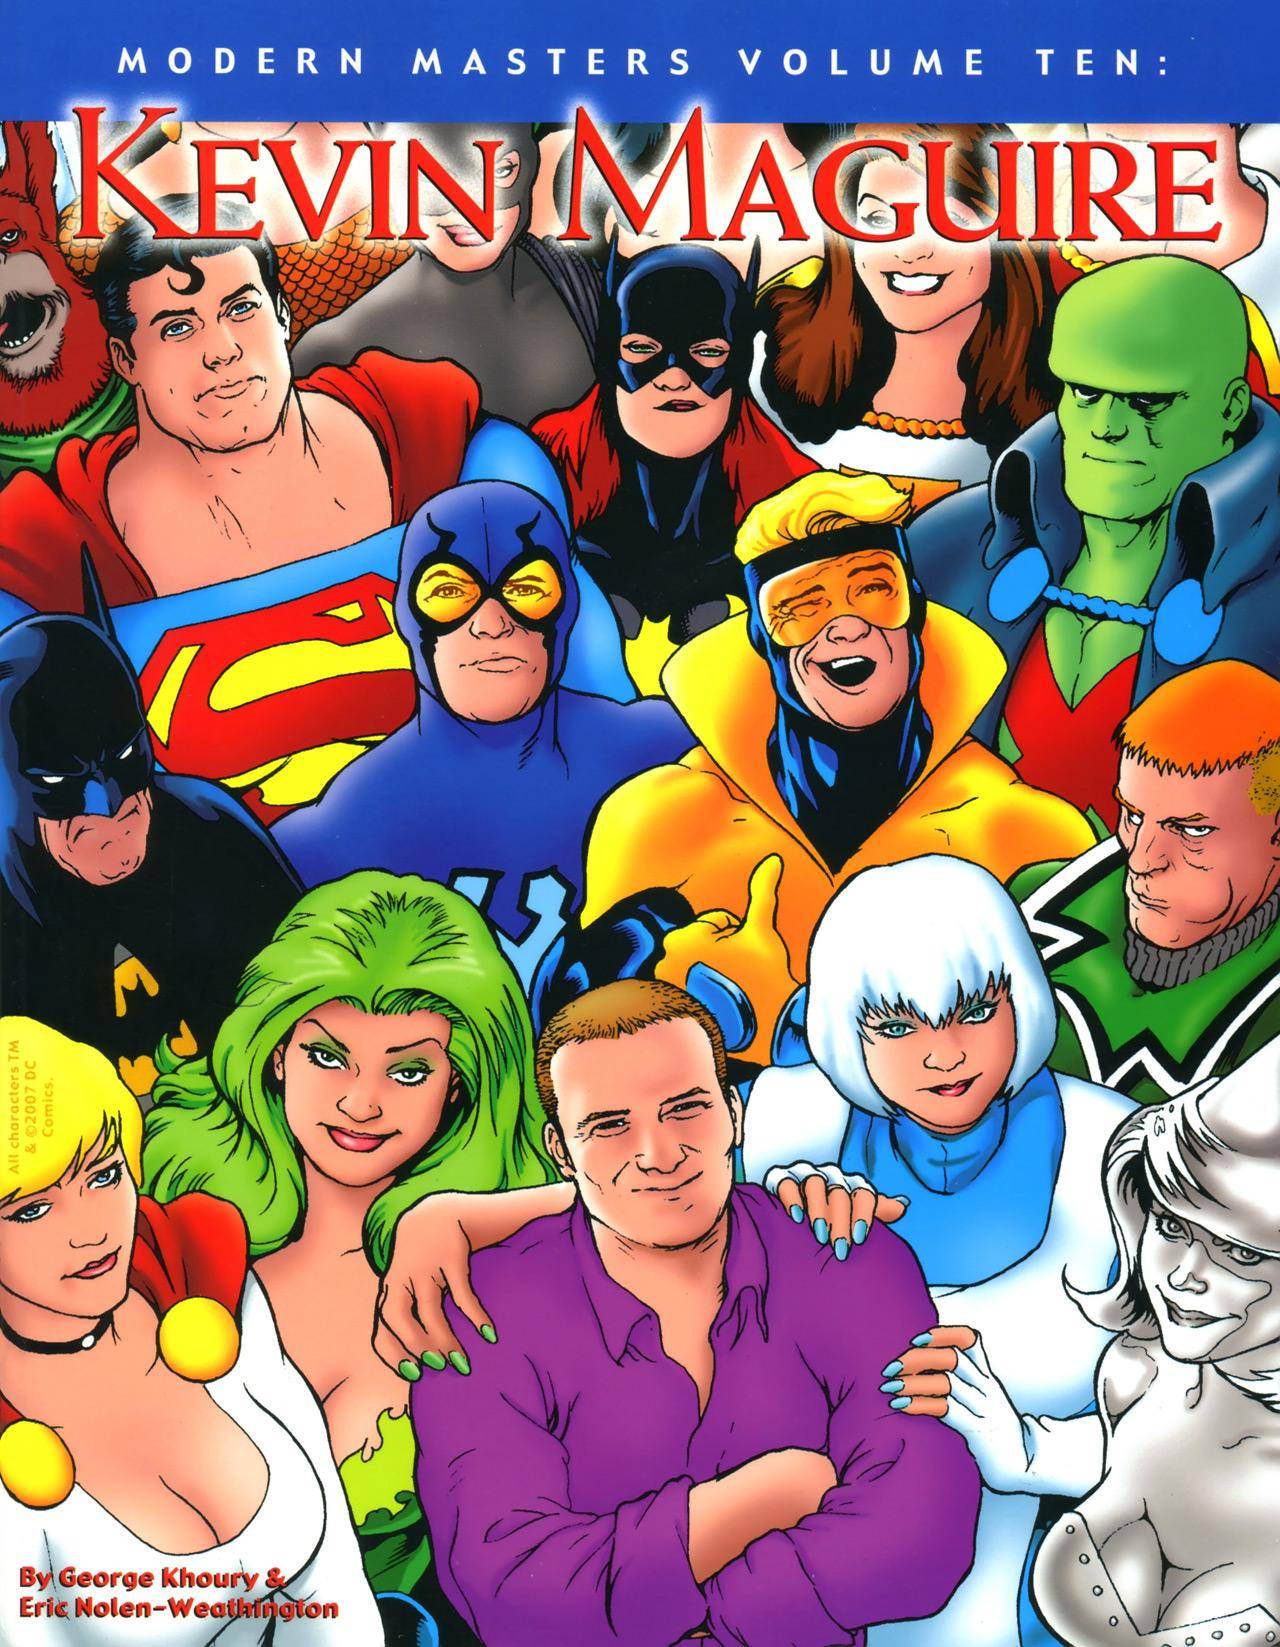 Modern Masters Vol 10 - Kevin Maguire ArtNet - DCP